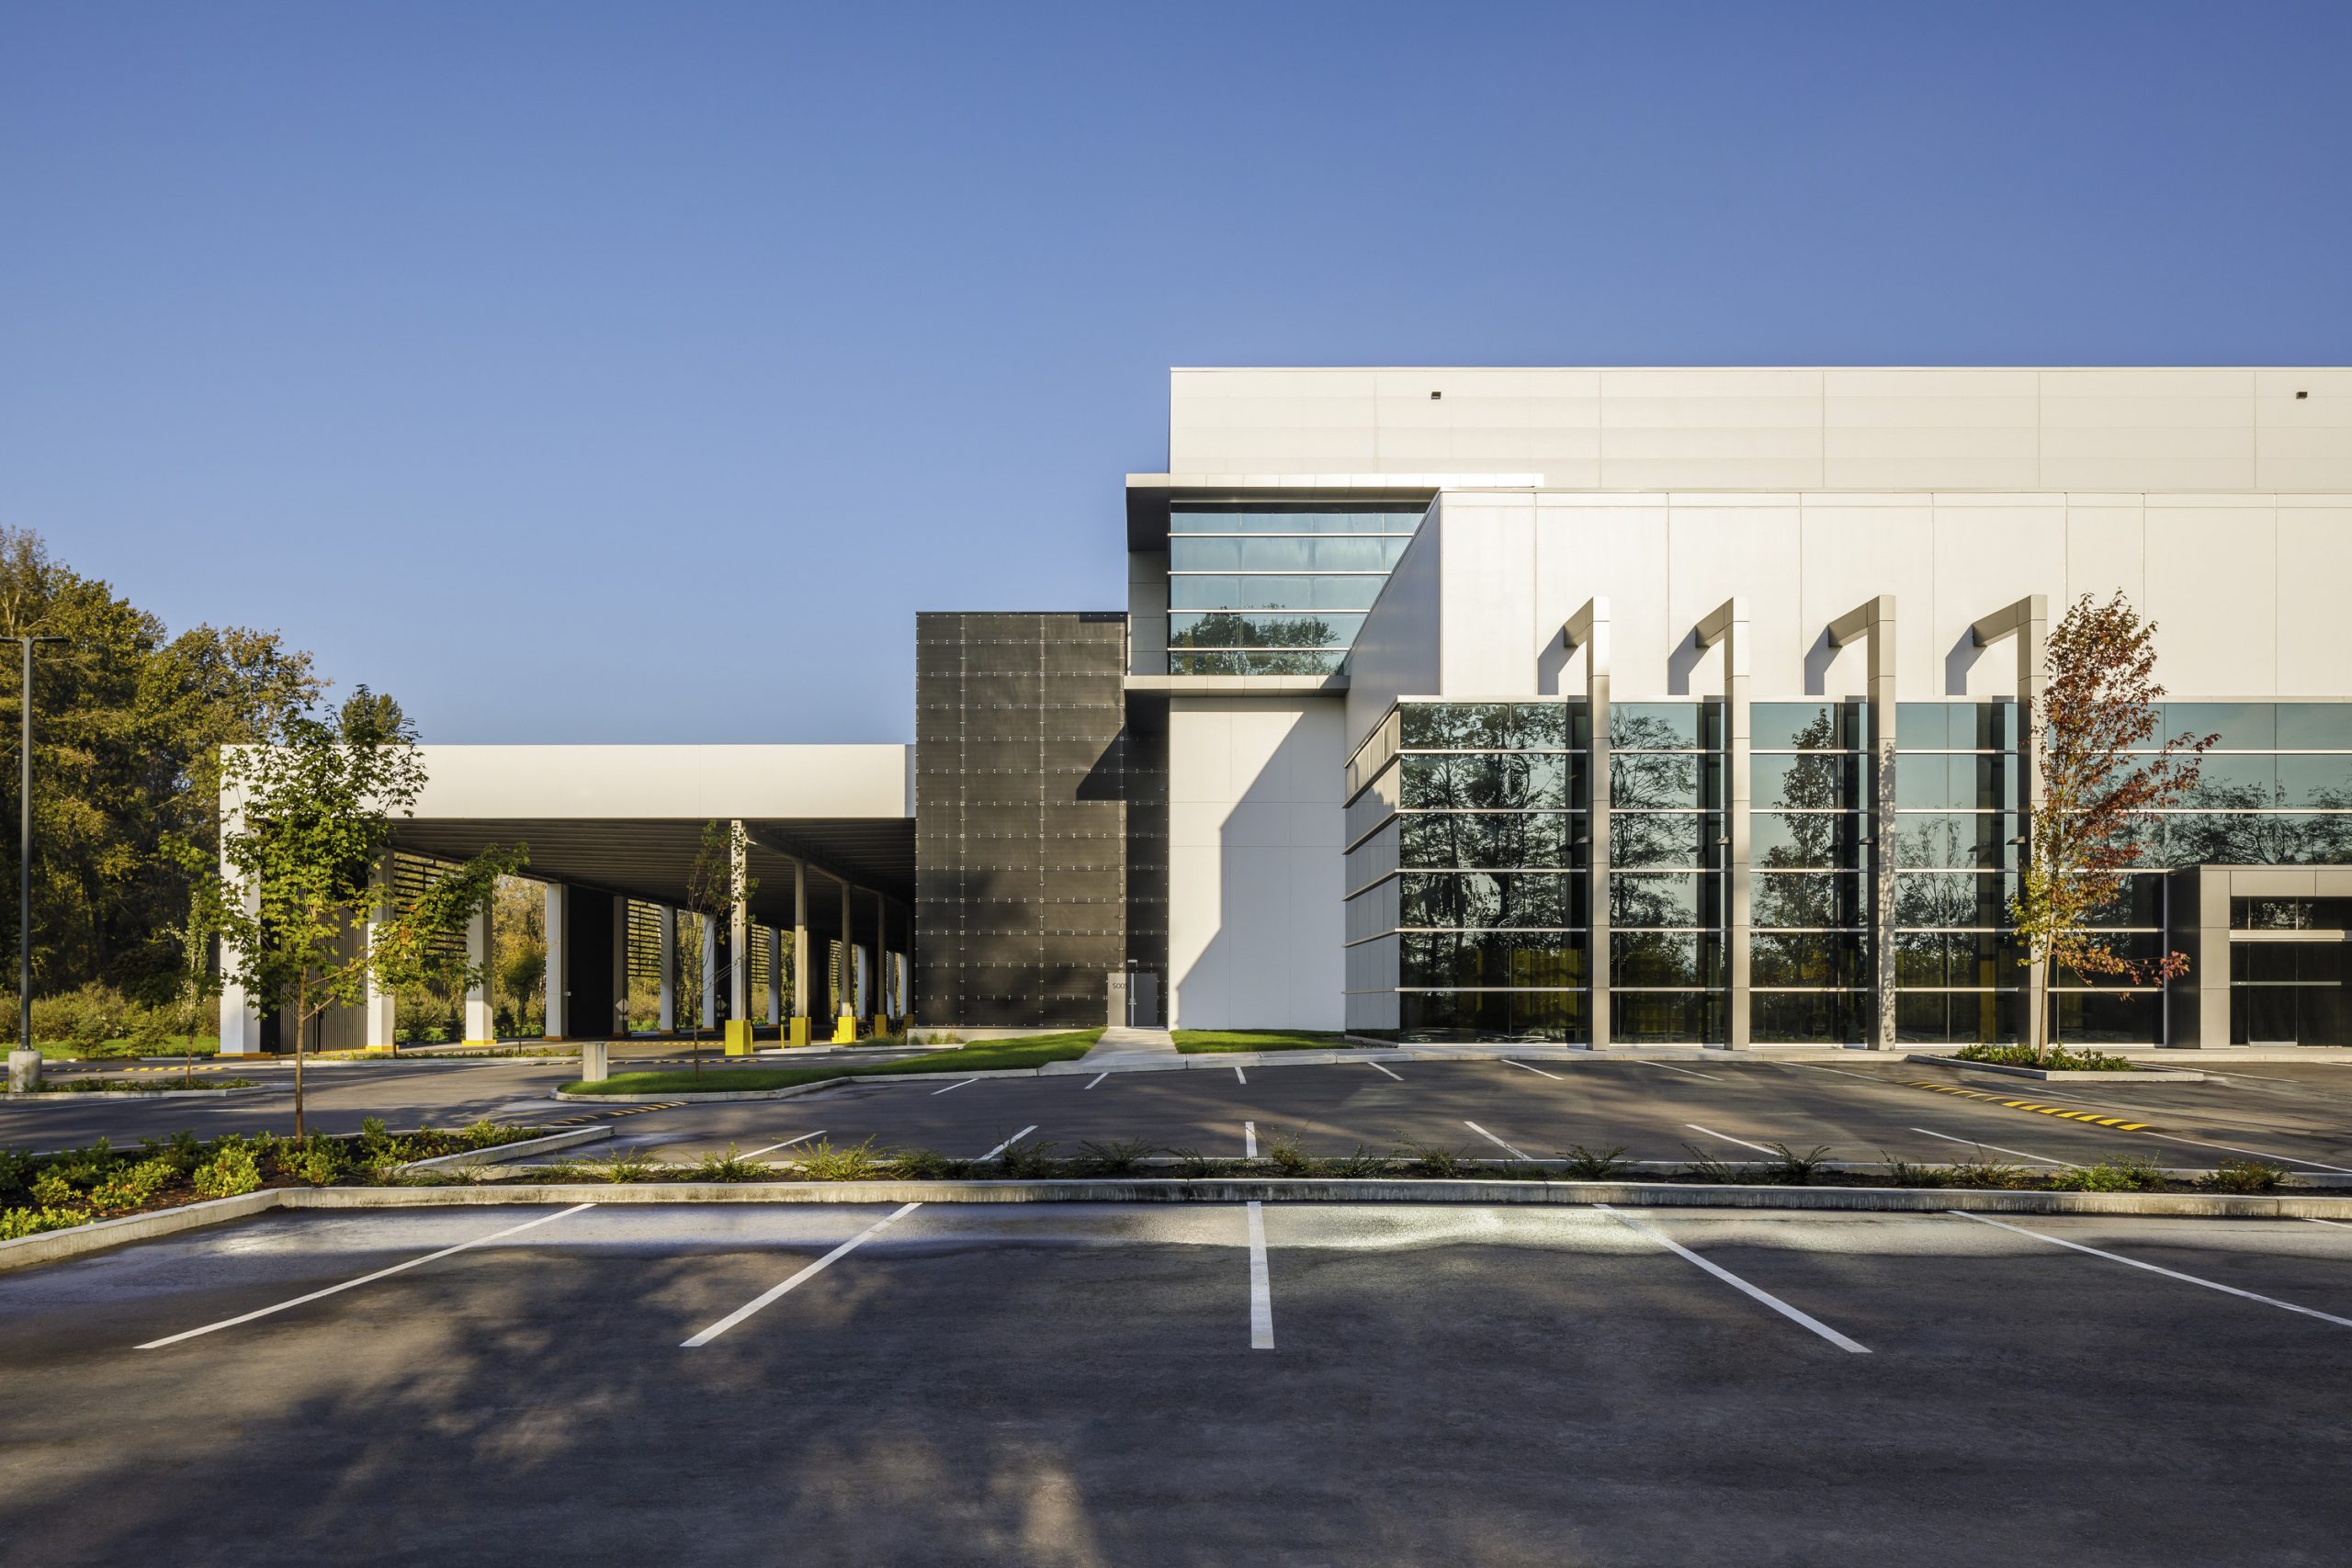 Construction completed on Canada’s first multi-story distribution center, Photo ©Luke Potter